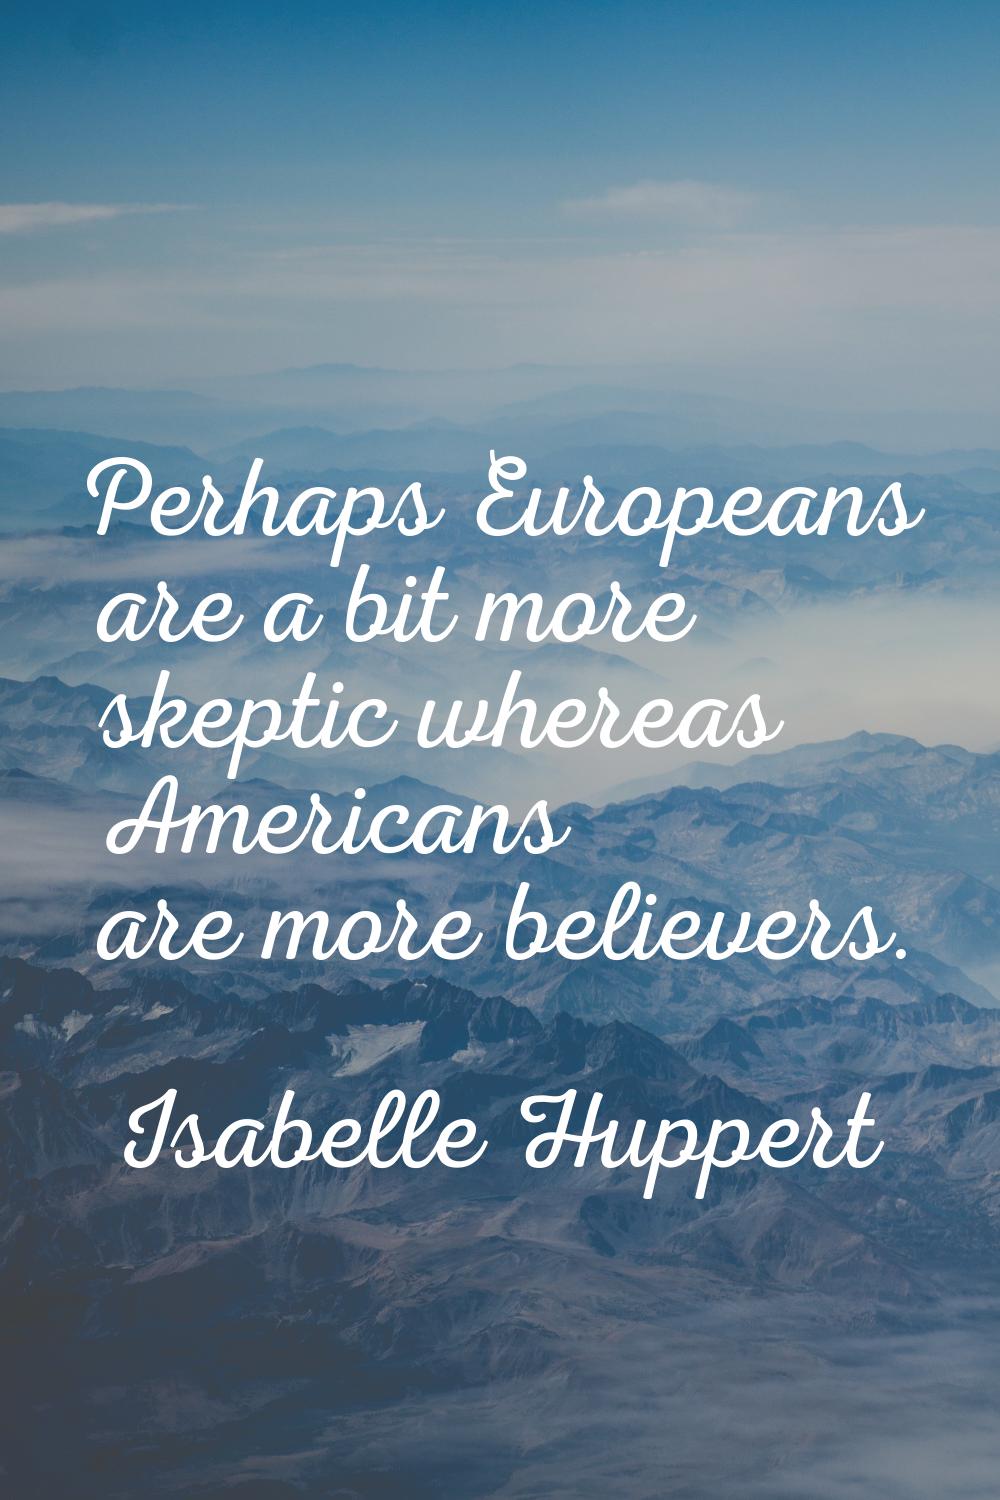 Perhaps Europeans are a bit more skeptic whereas Americans are more believers.